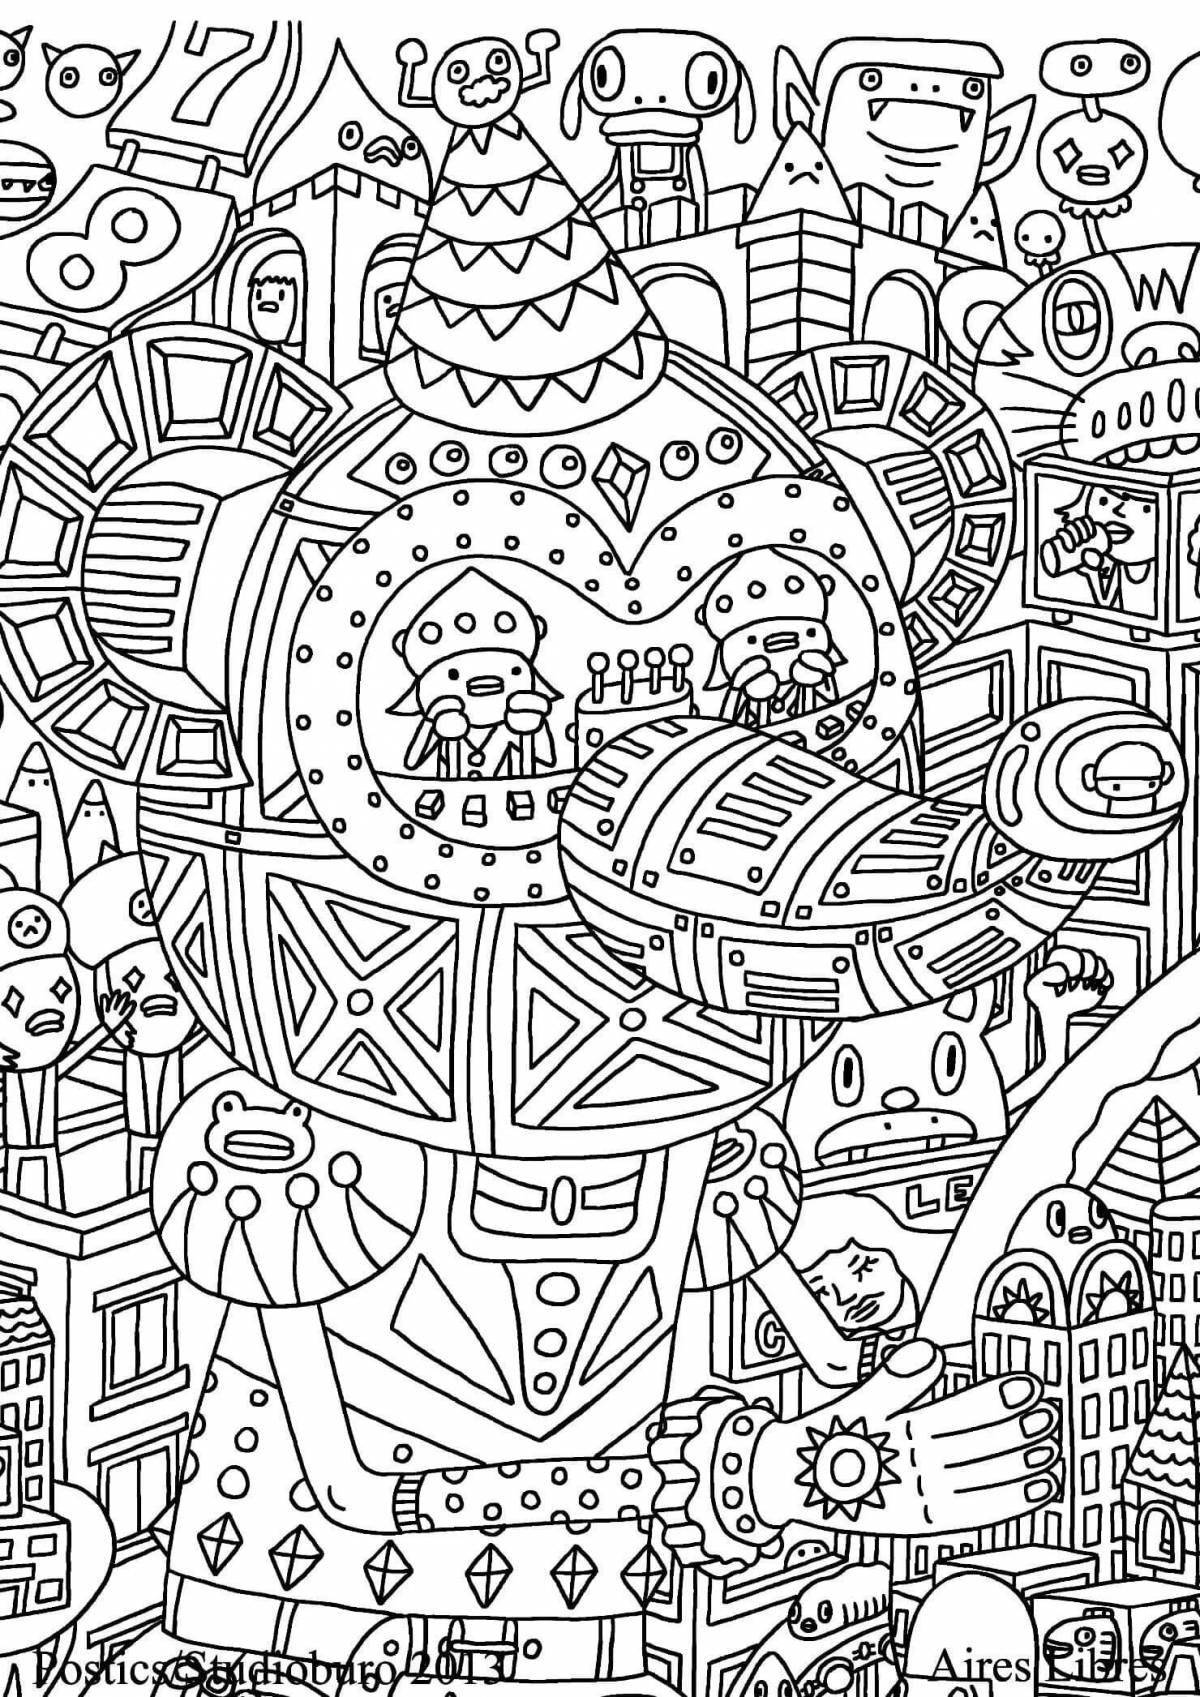 Great adult coloring book